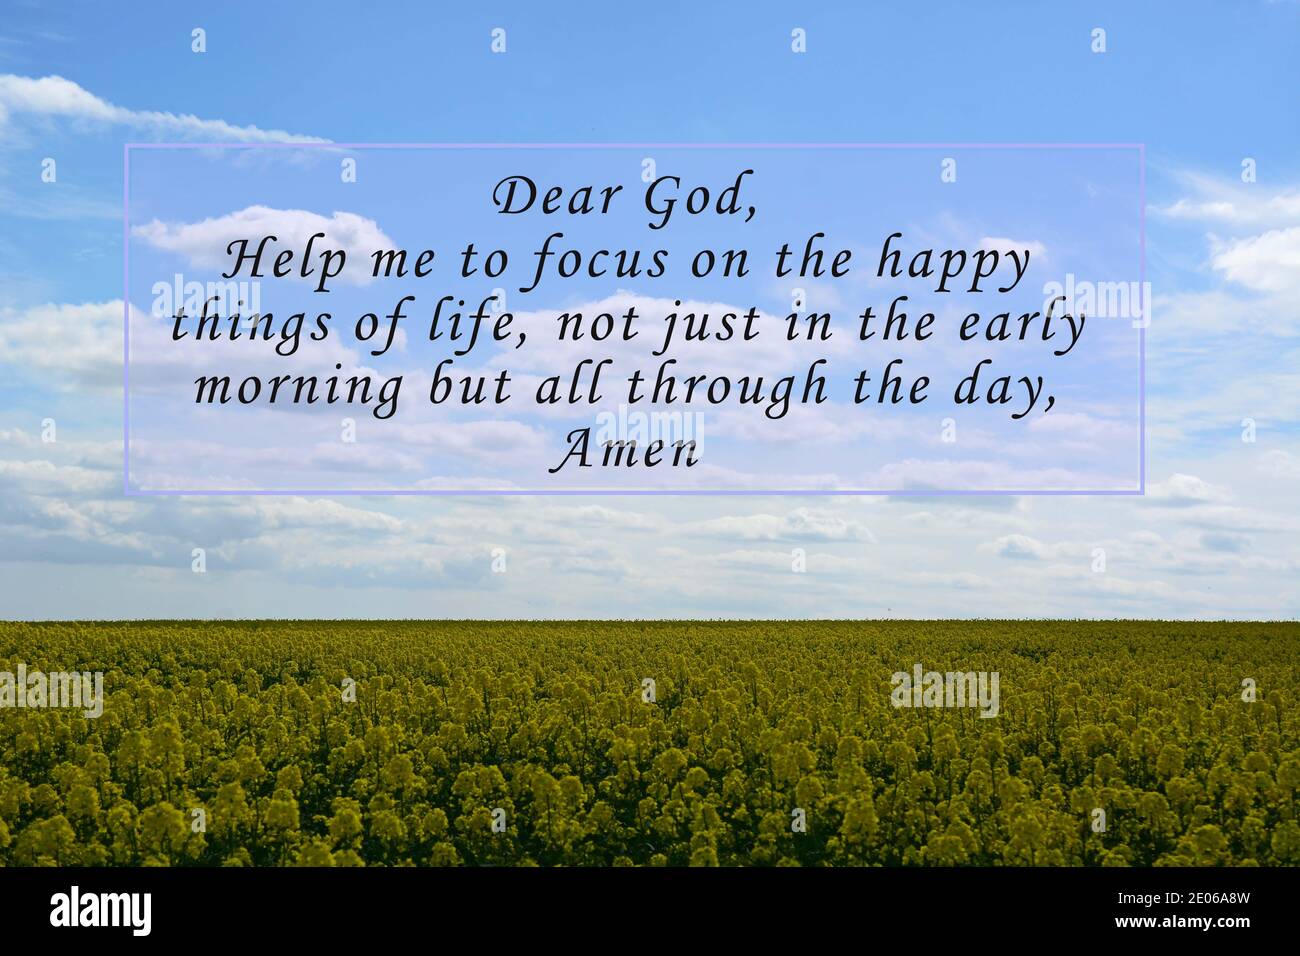 Image with prayer quotes - Dear God, help me to focus on the happy ...